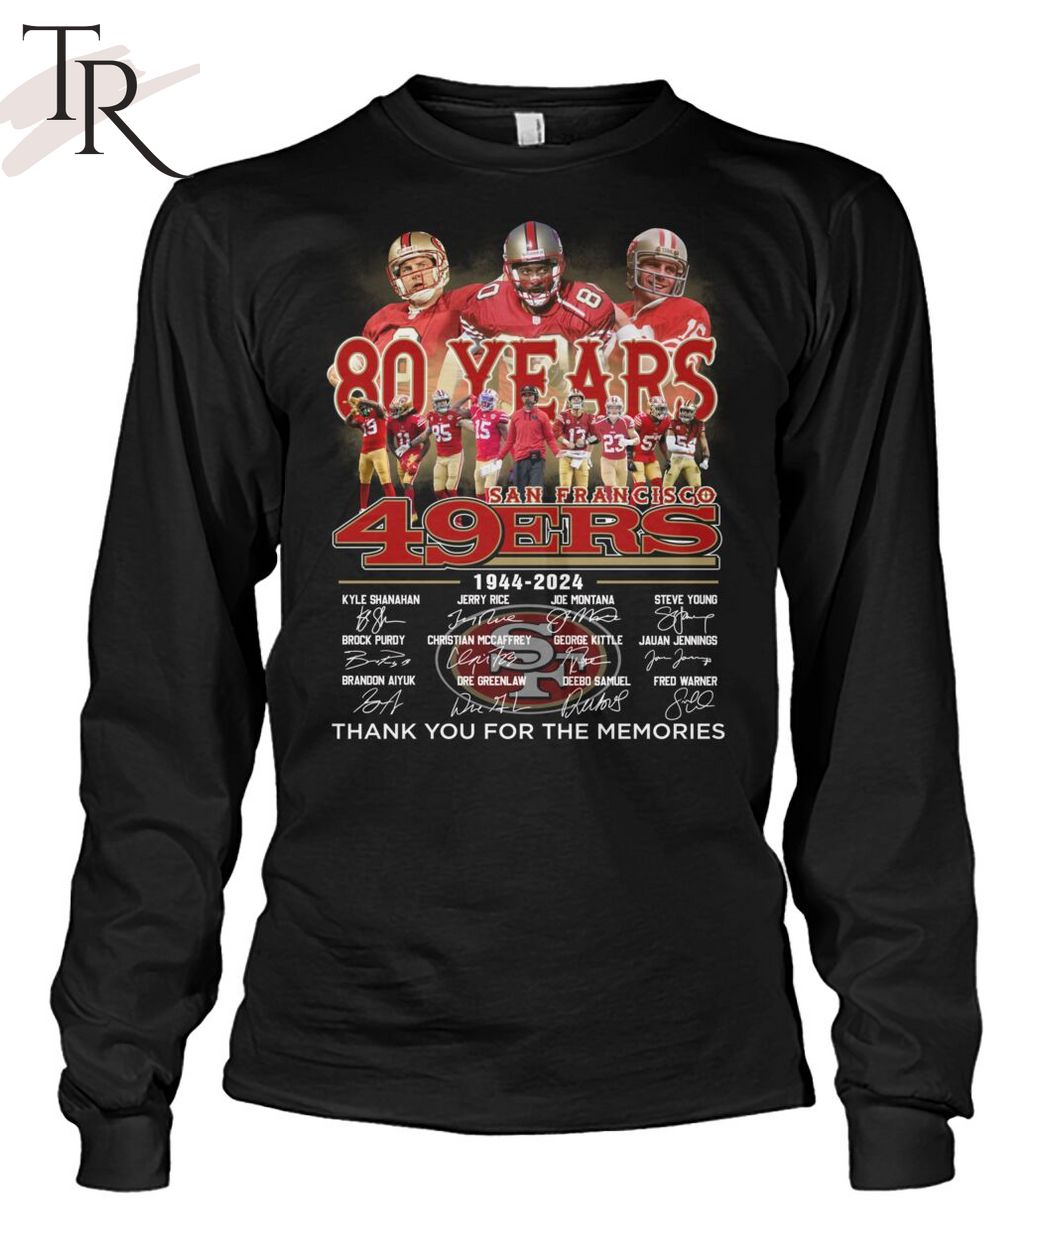 San Francisco 49ers 80 Years Of 1944 - 2024 Thank You For The Memories T-Shirt